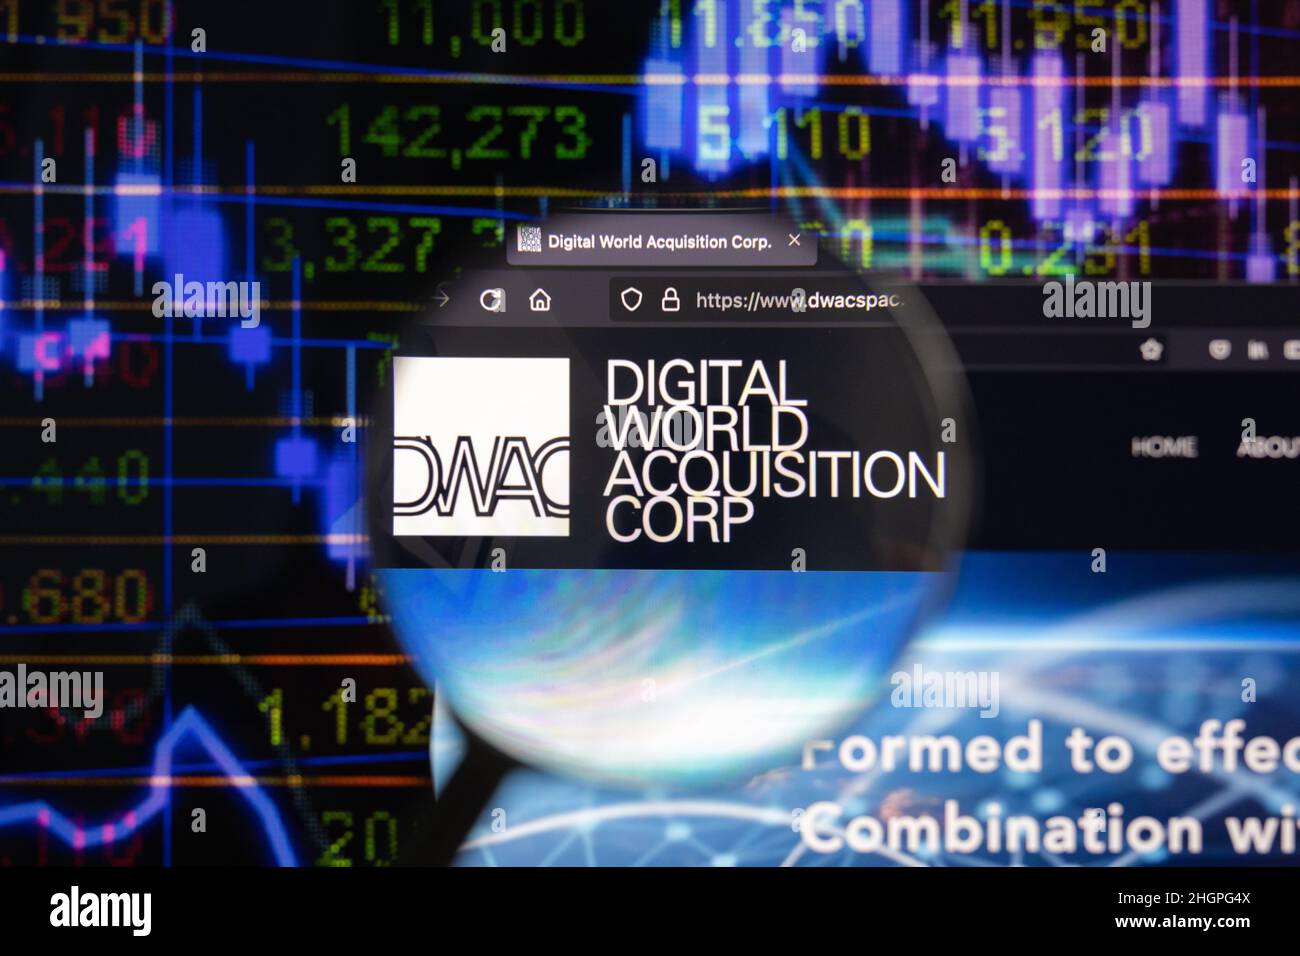 Digital World Acquisition Corp DWAC company logo on a website with blurry stock market developments in the background, seen on a computer screen Stock Photo